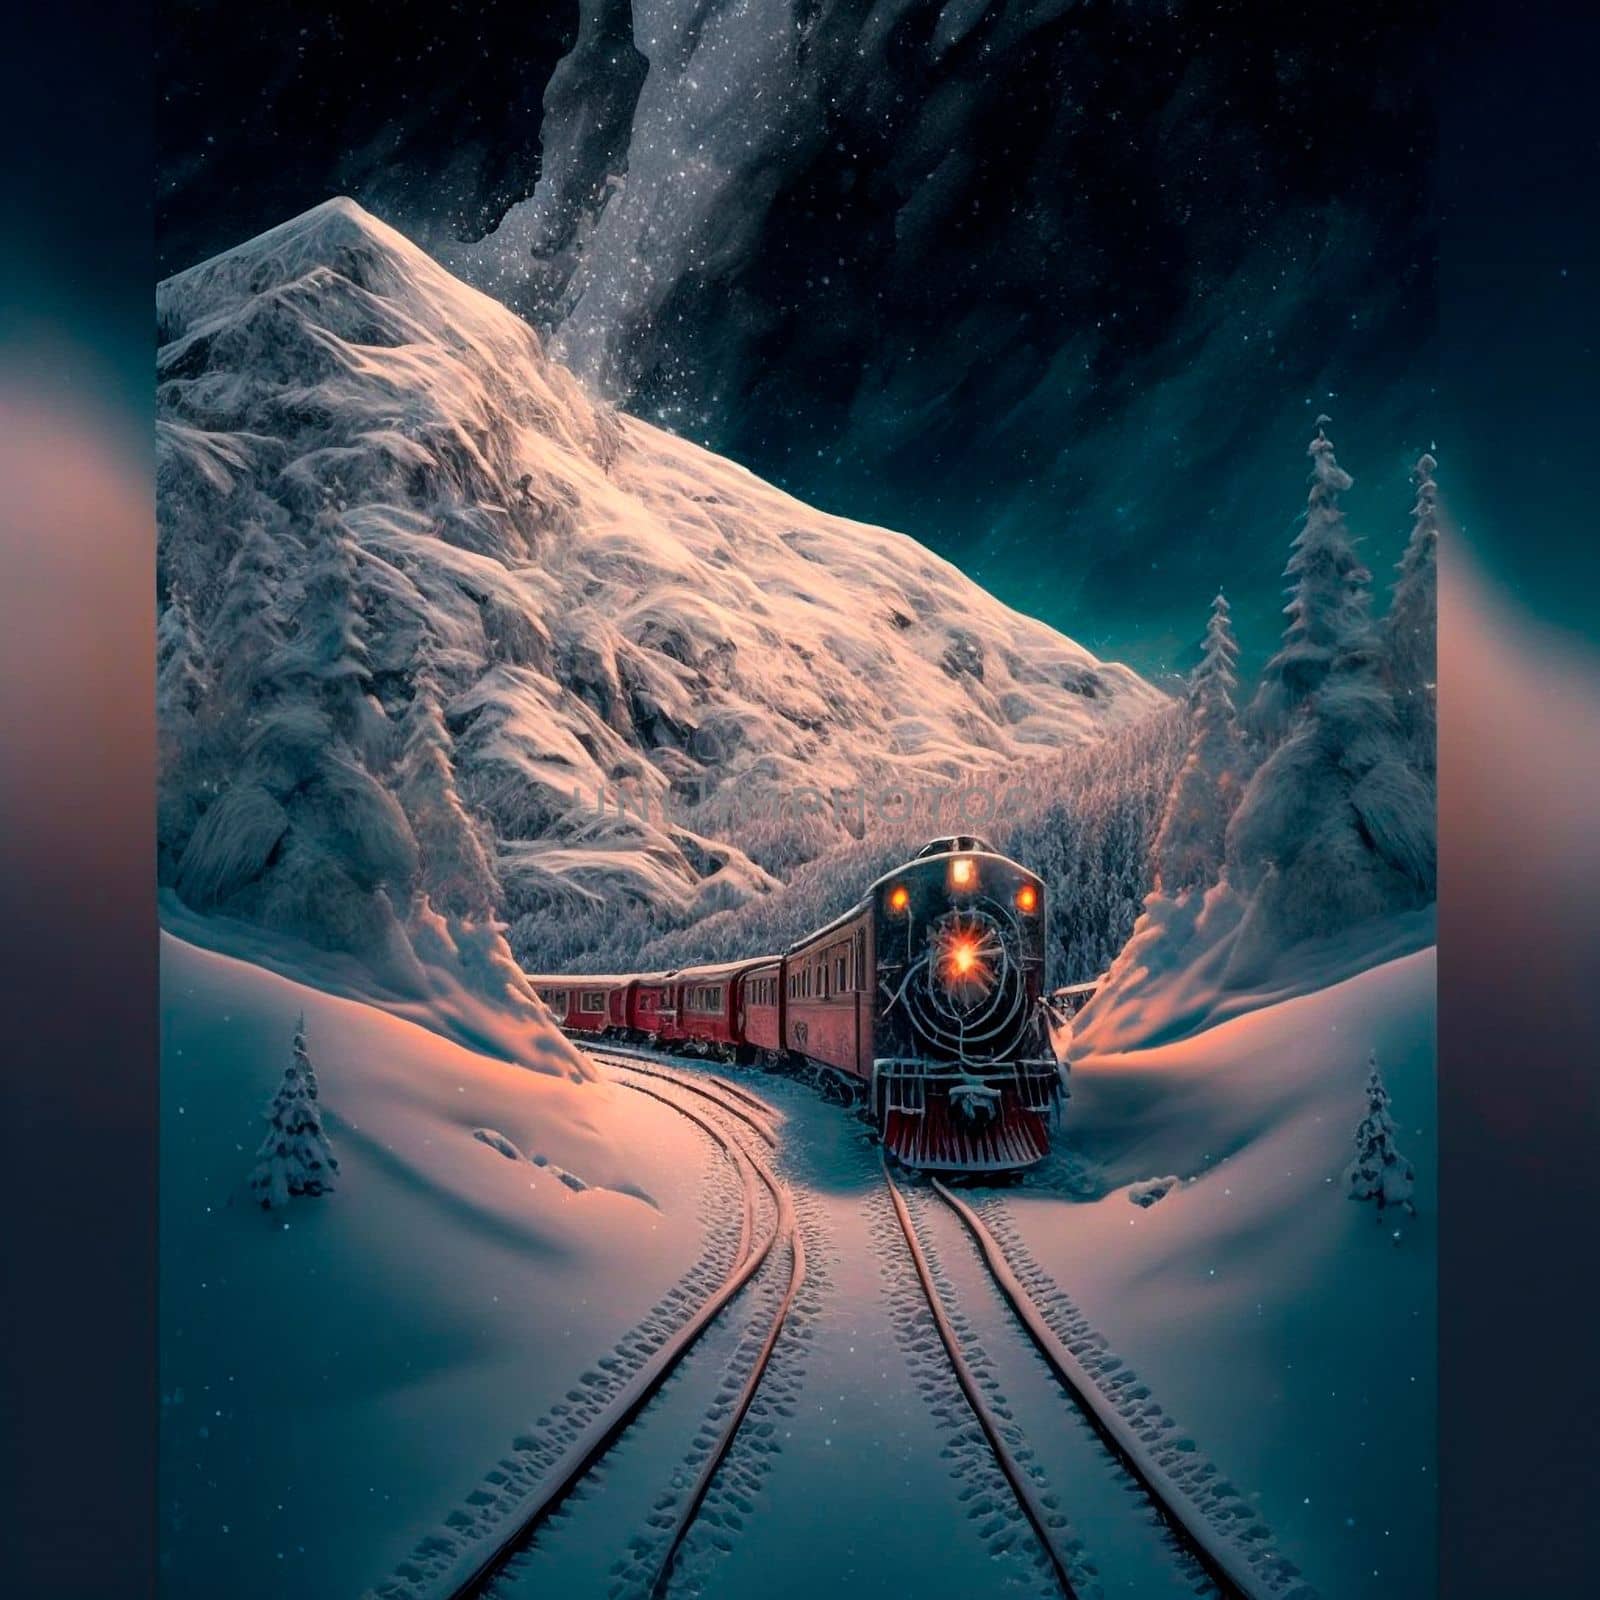 Winter train rides in snowy mountains. A beautiful winter fairy tale by NeuroSky